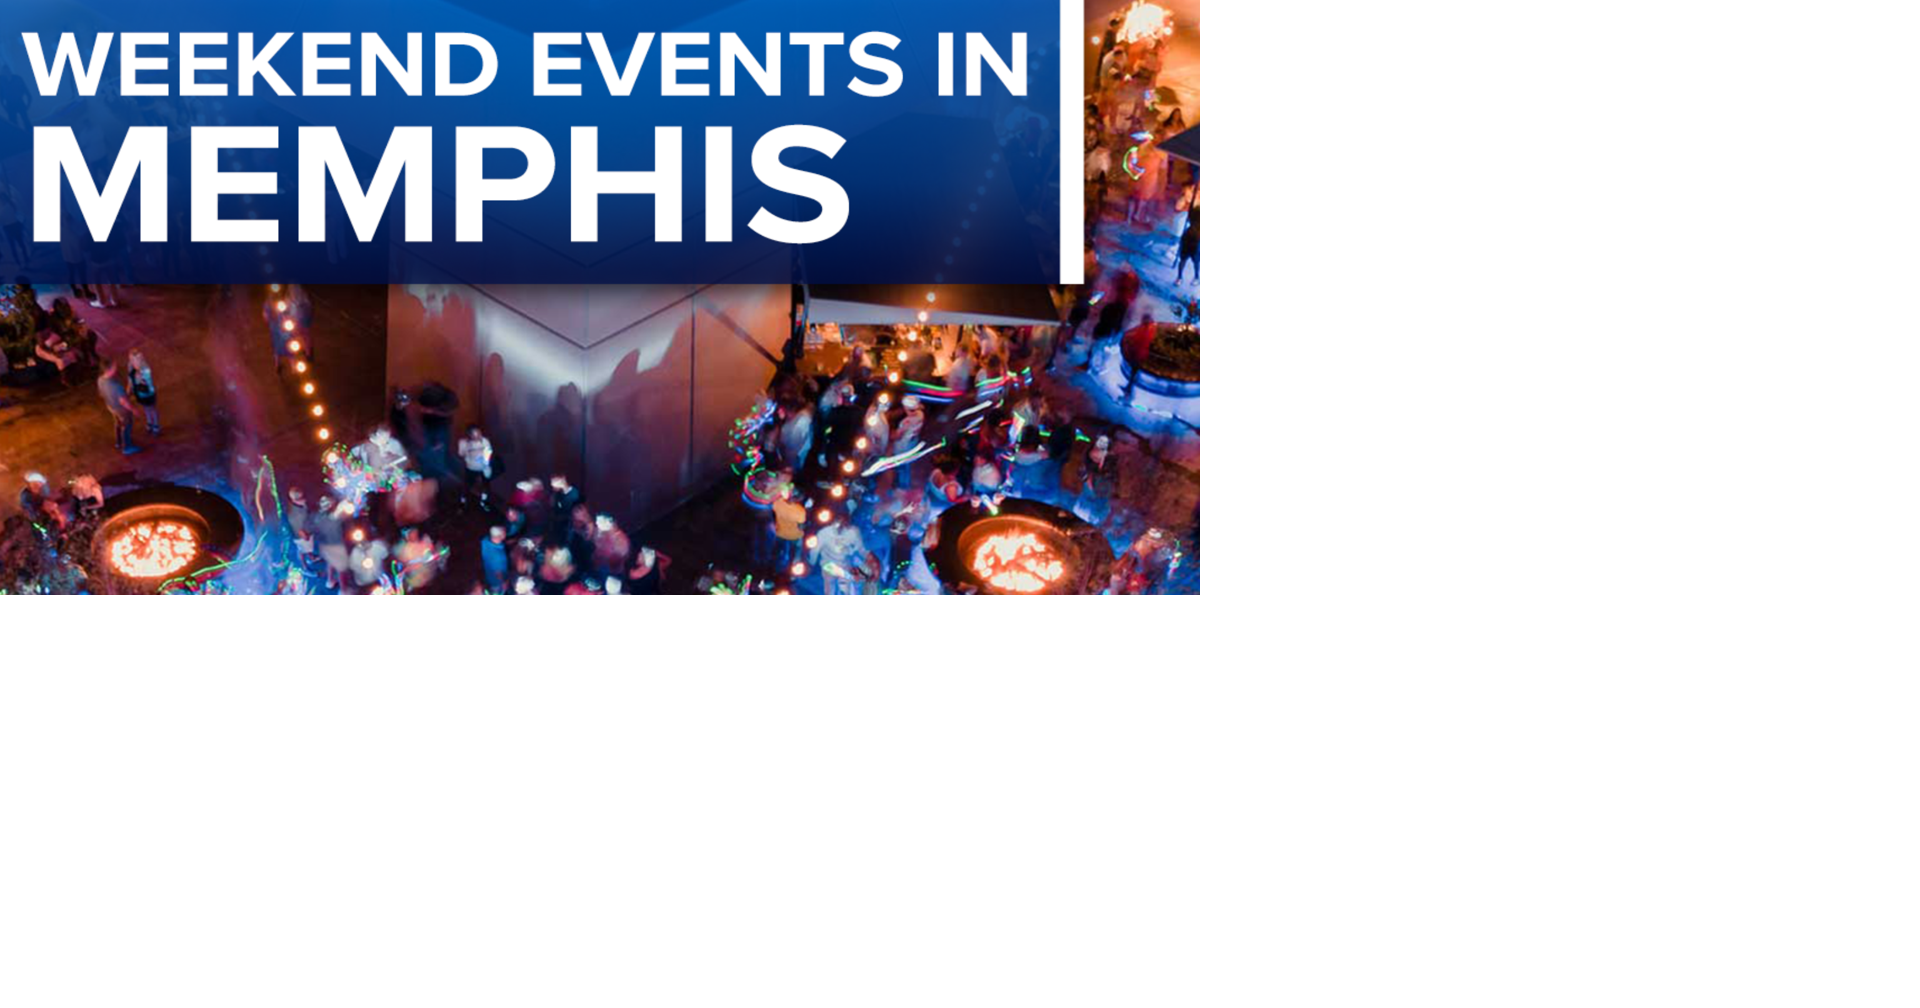 Fun events planned for the weekend in Memphis